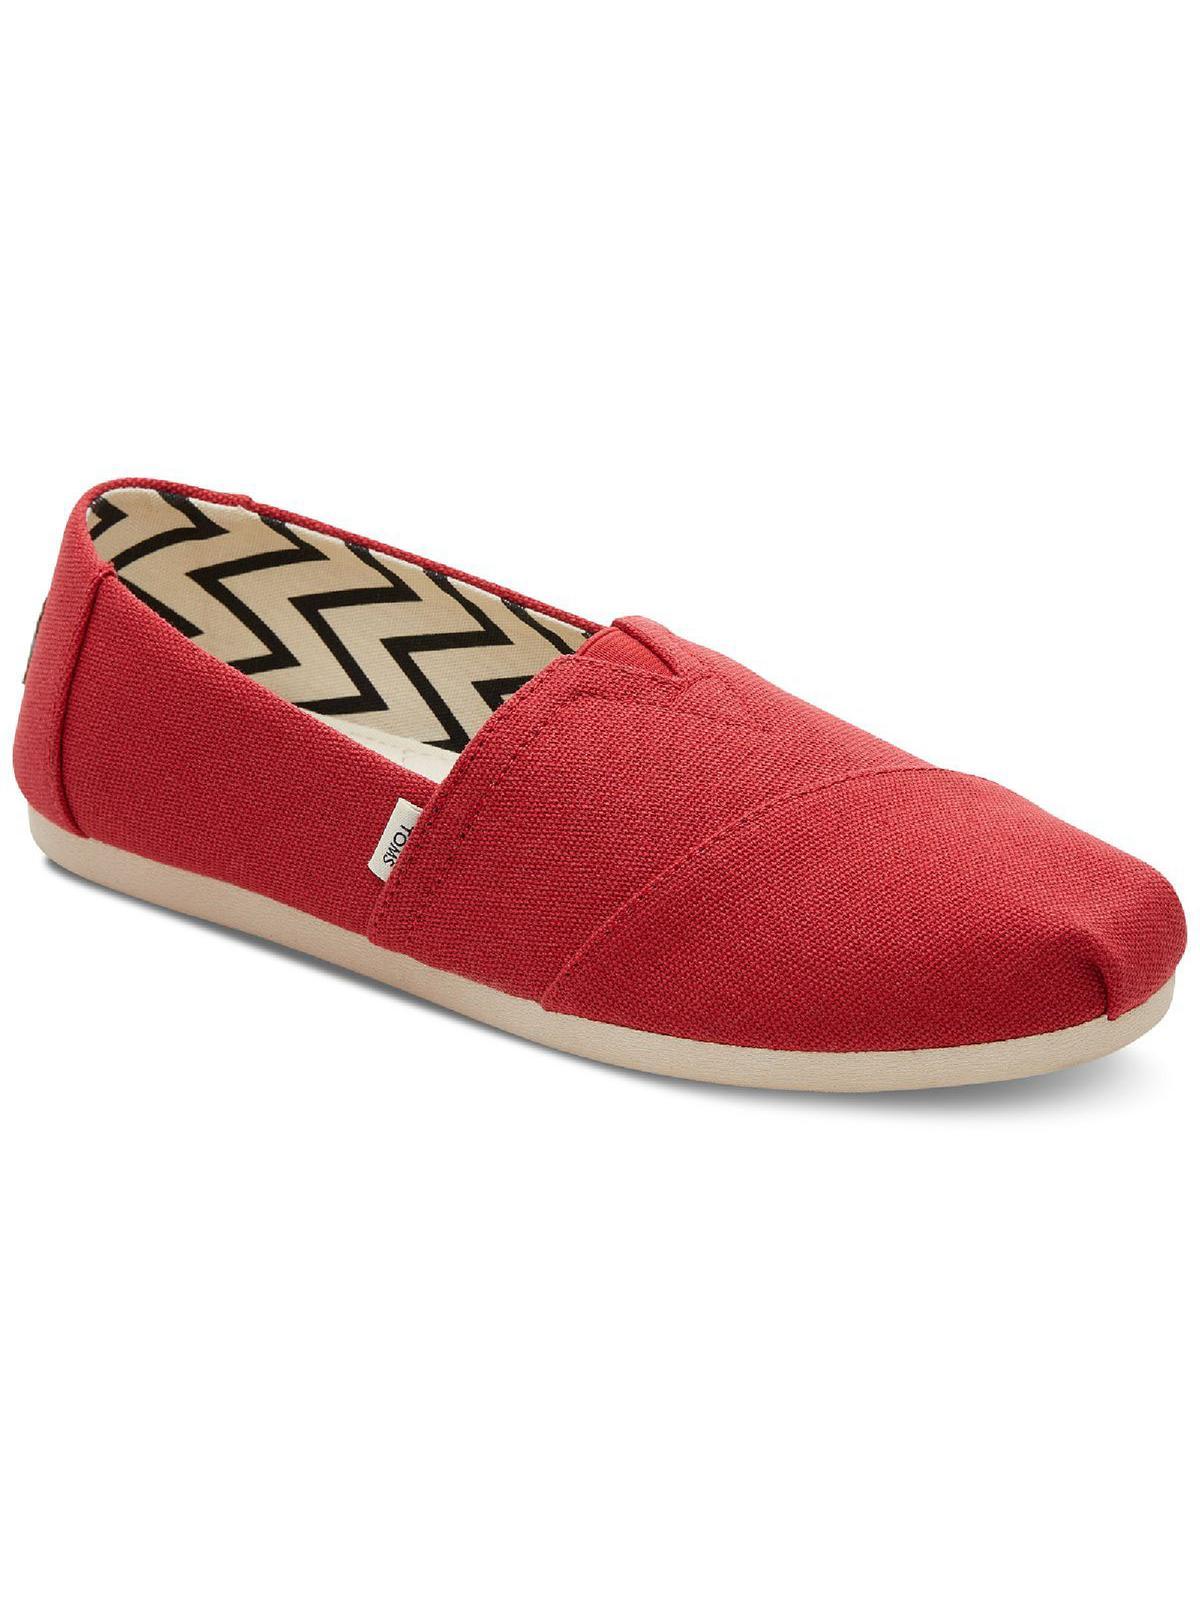 TOMS Alpargata Flat Canvas Loafers in Red | Lyst